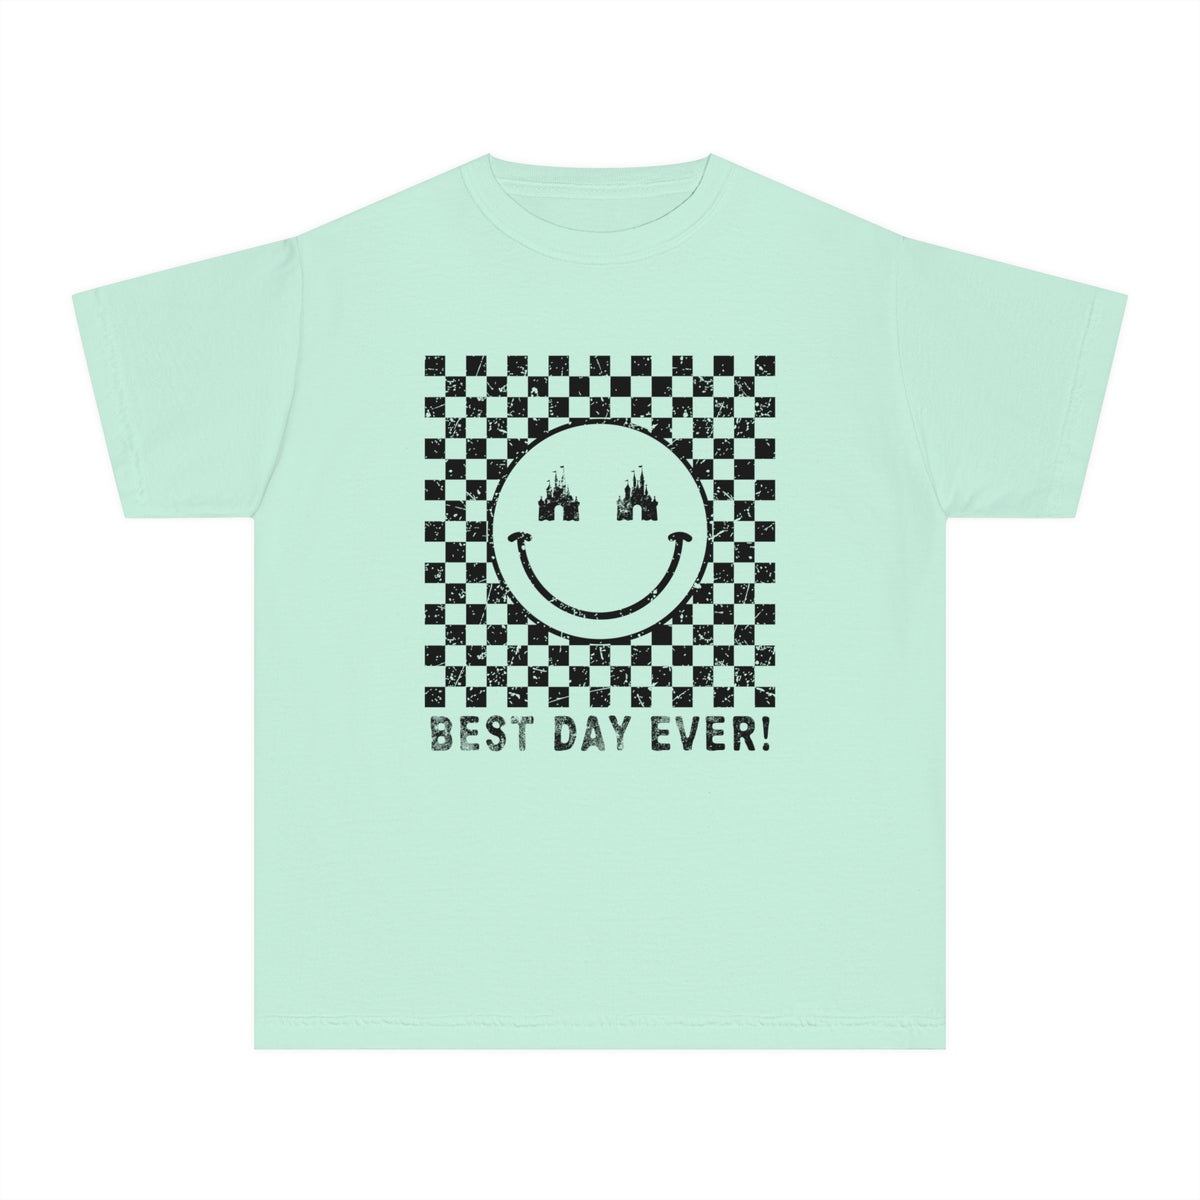 Retro Checkered Best Day Ever Comfort Colors Youth Midweight Tee